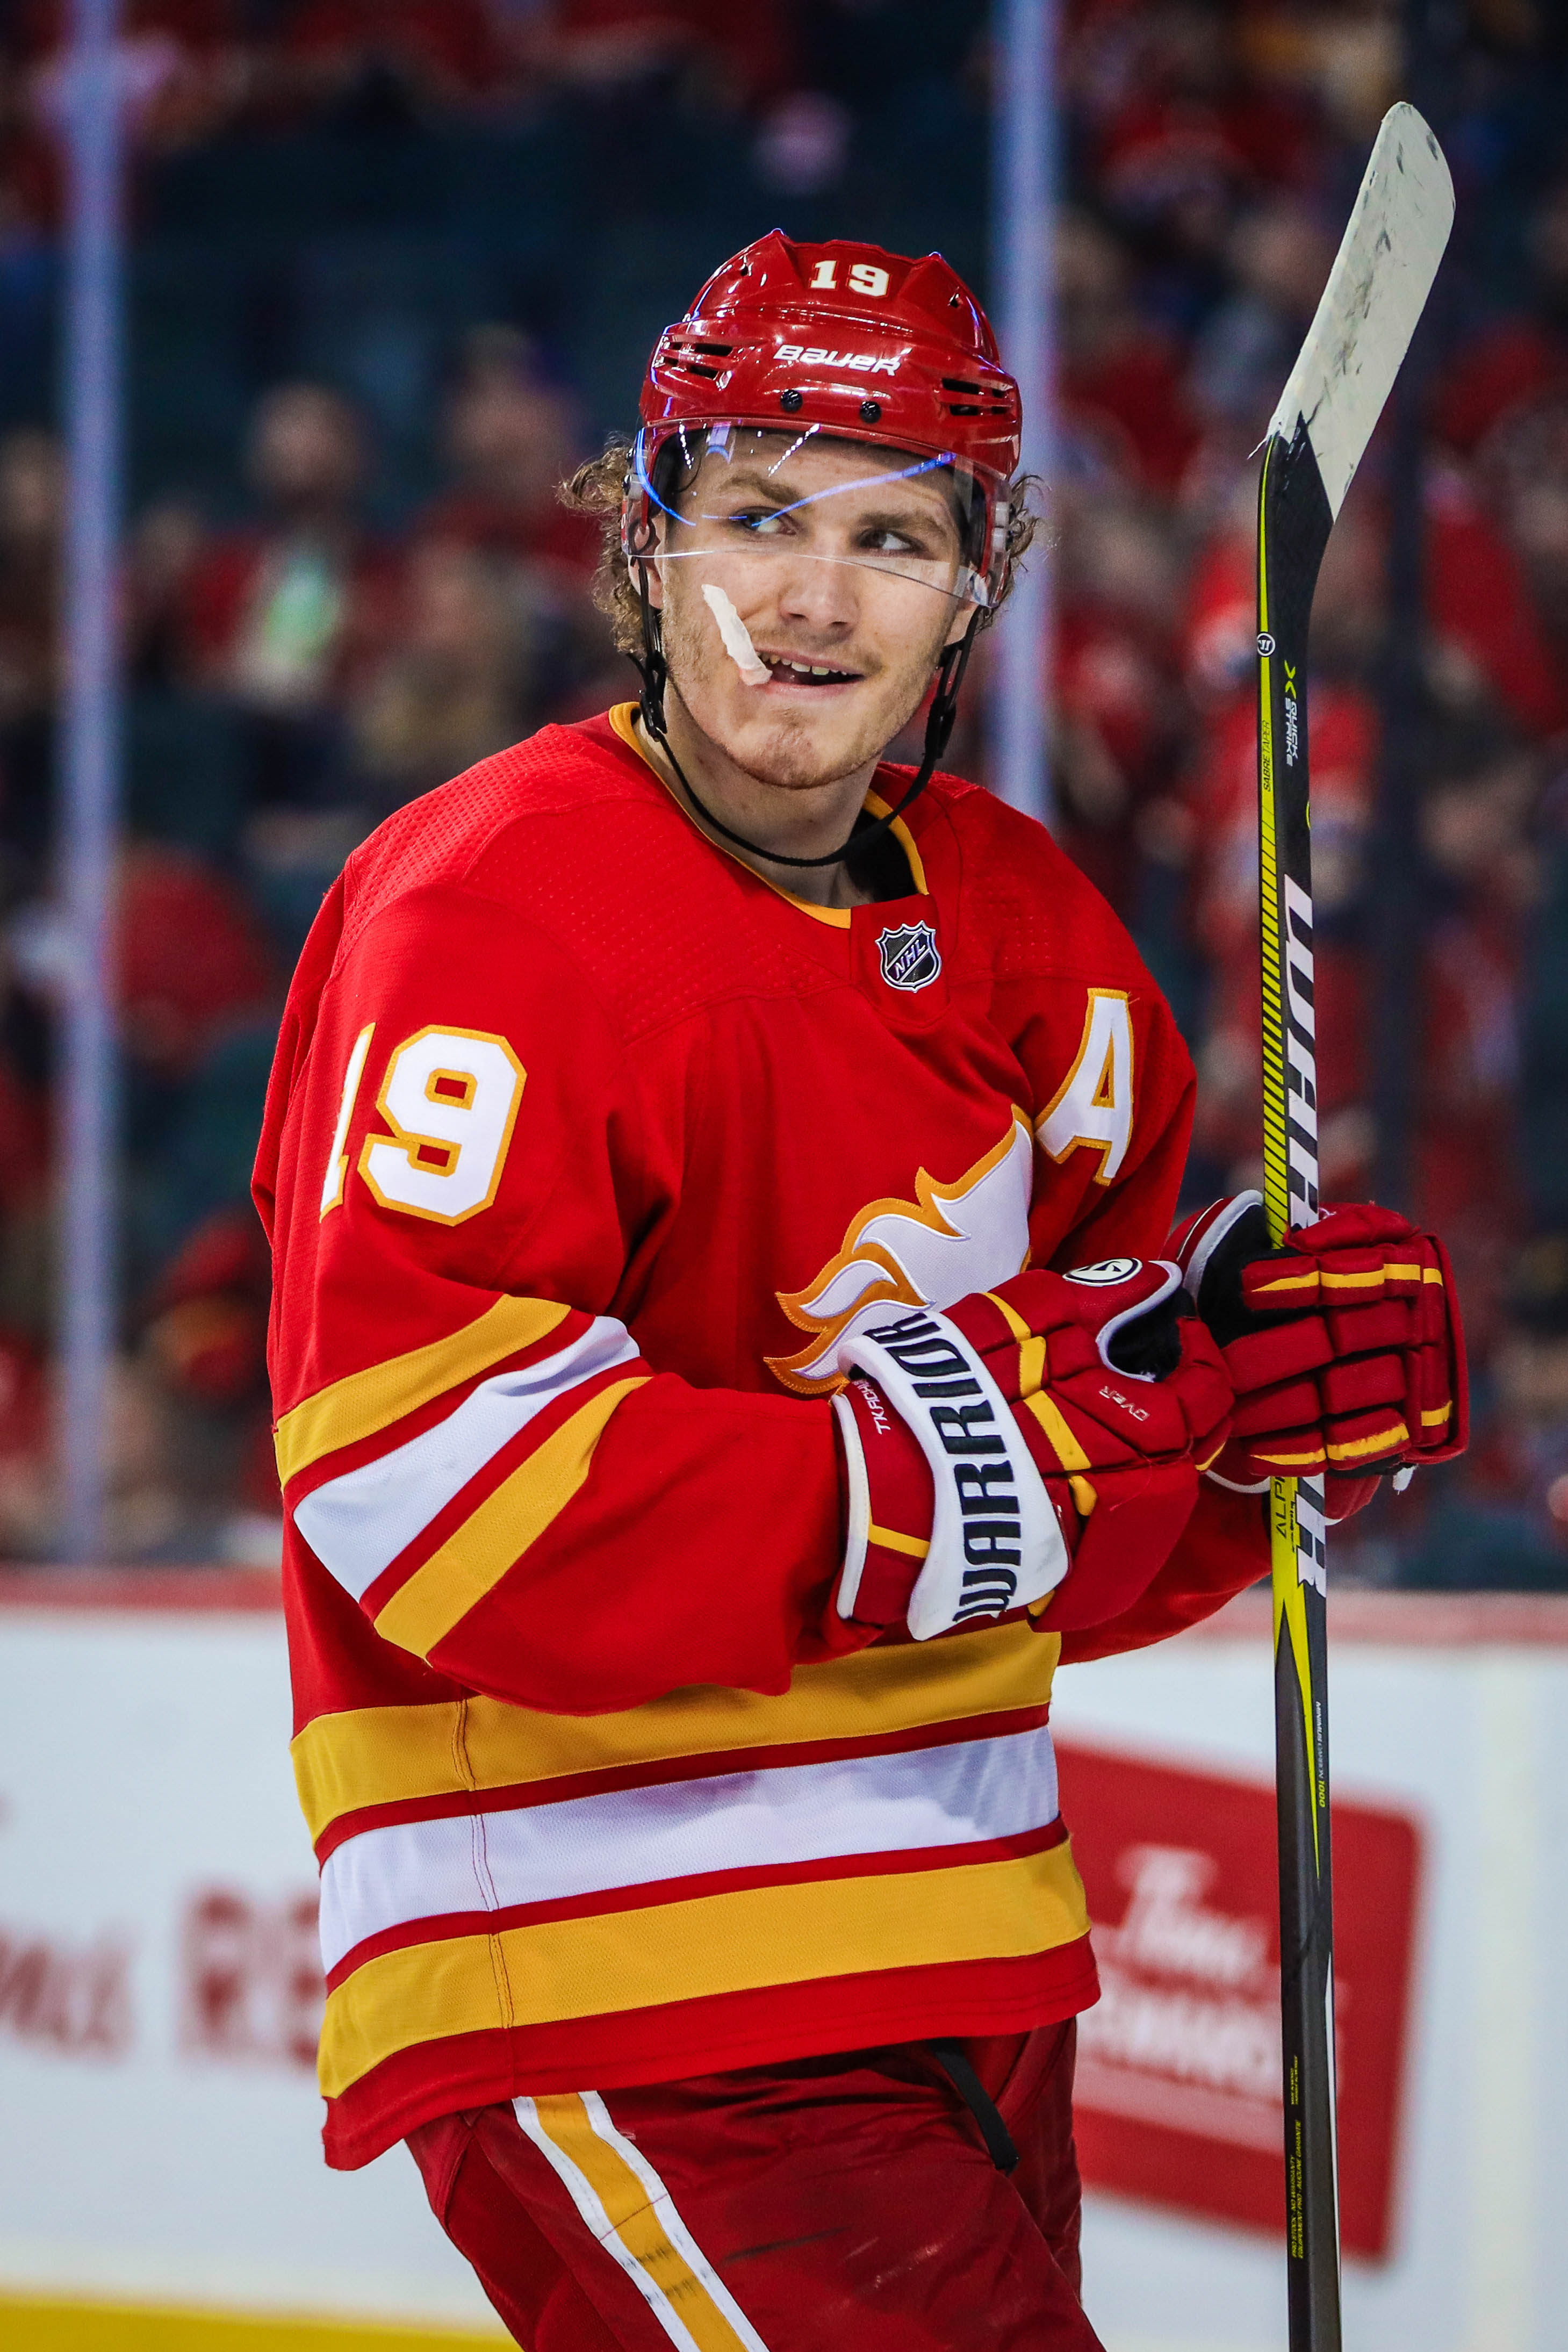 Is There Any Sense in Moving Matthew Tkachuk? - Matchsticks and Gasoline